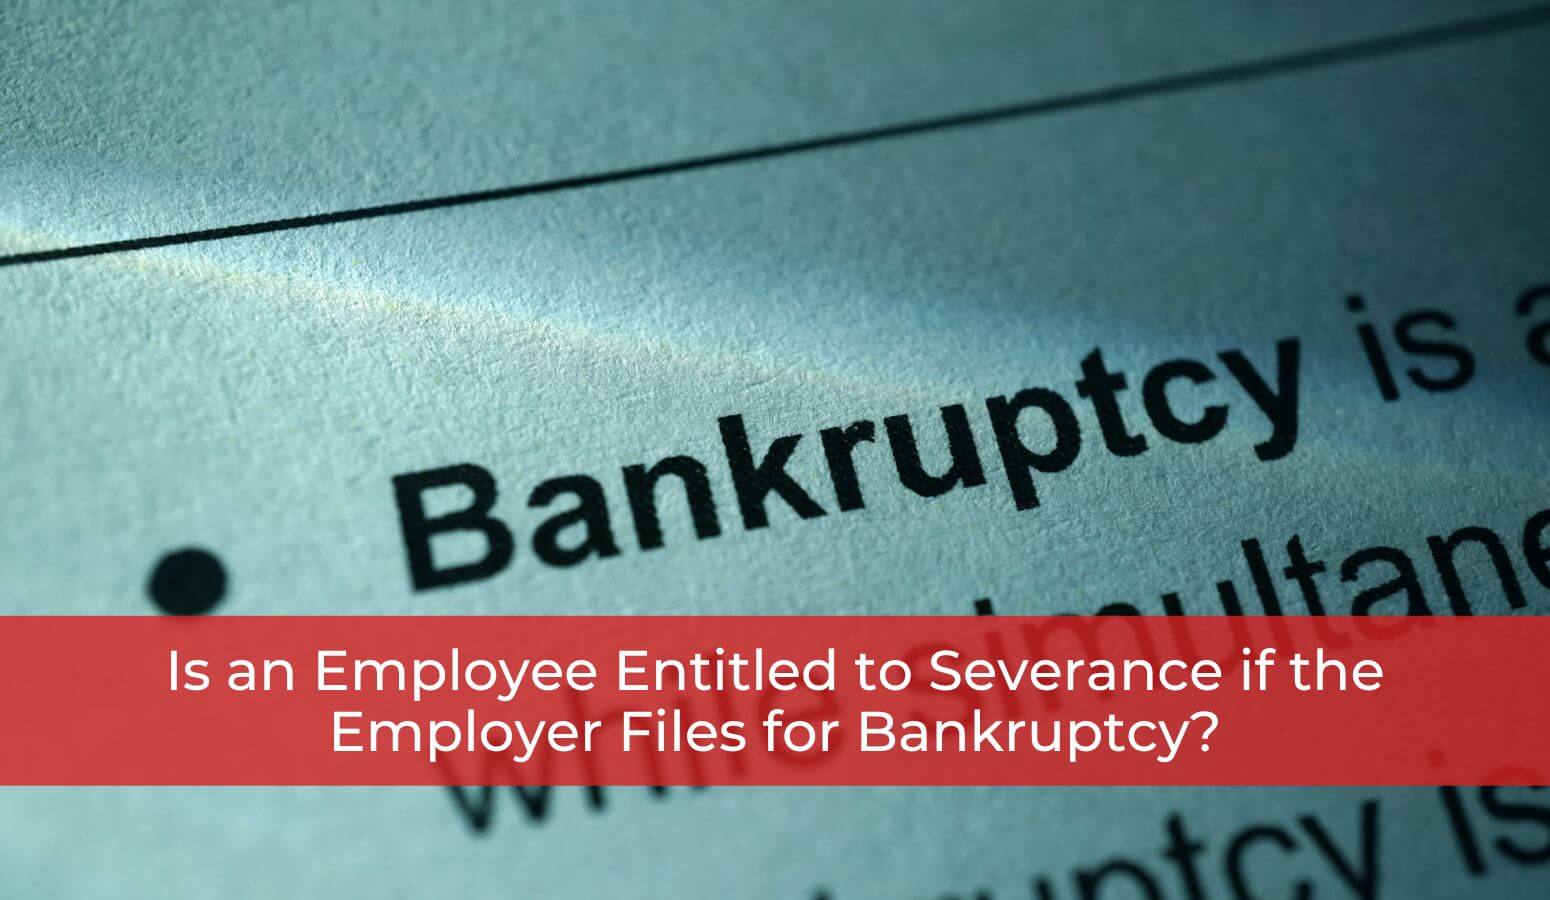 Is an Employee Entitled to Severance if the Employer Files for Bankruptcy?